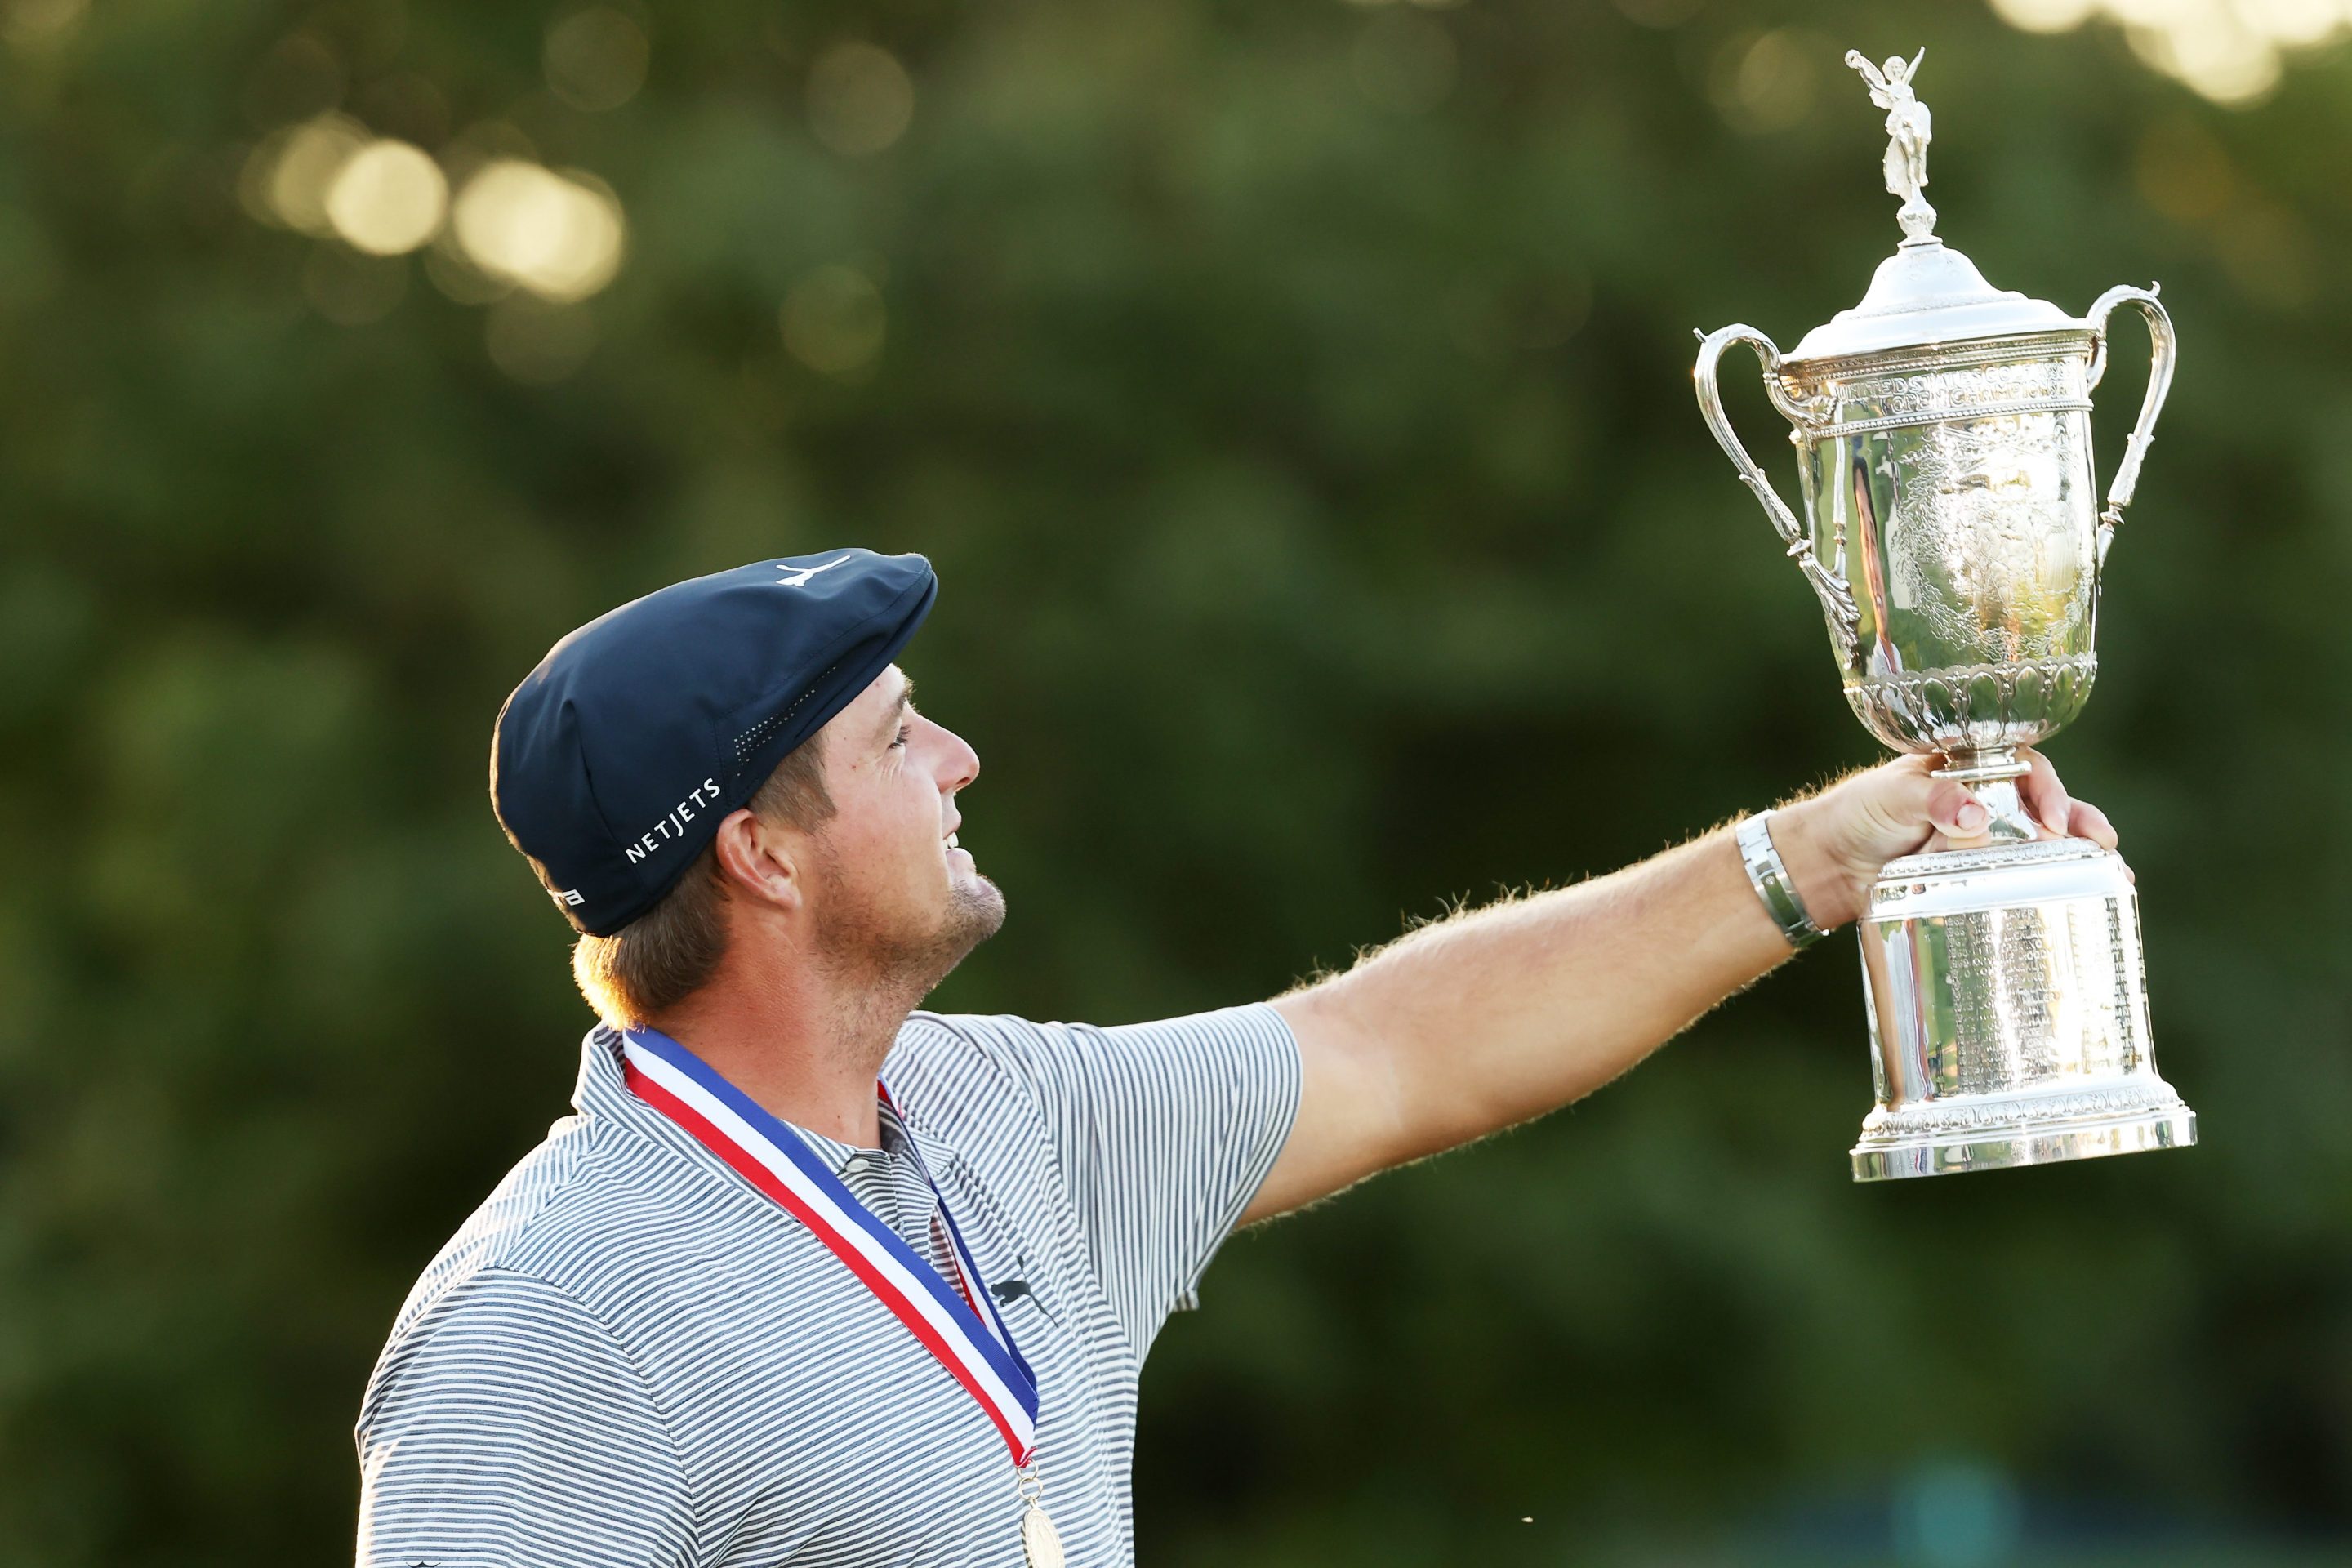 Bryson DeChambeau admires the U.S. Open Championship Trophy after winning the 2020 U.S. Open at Winged Foot.